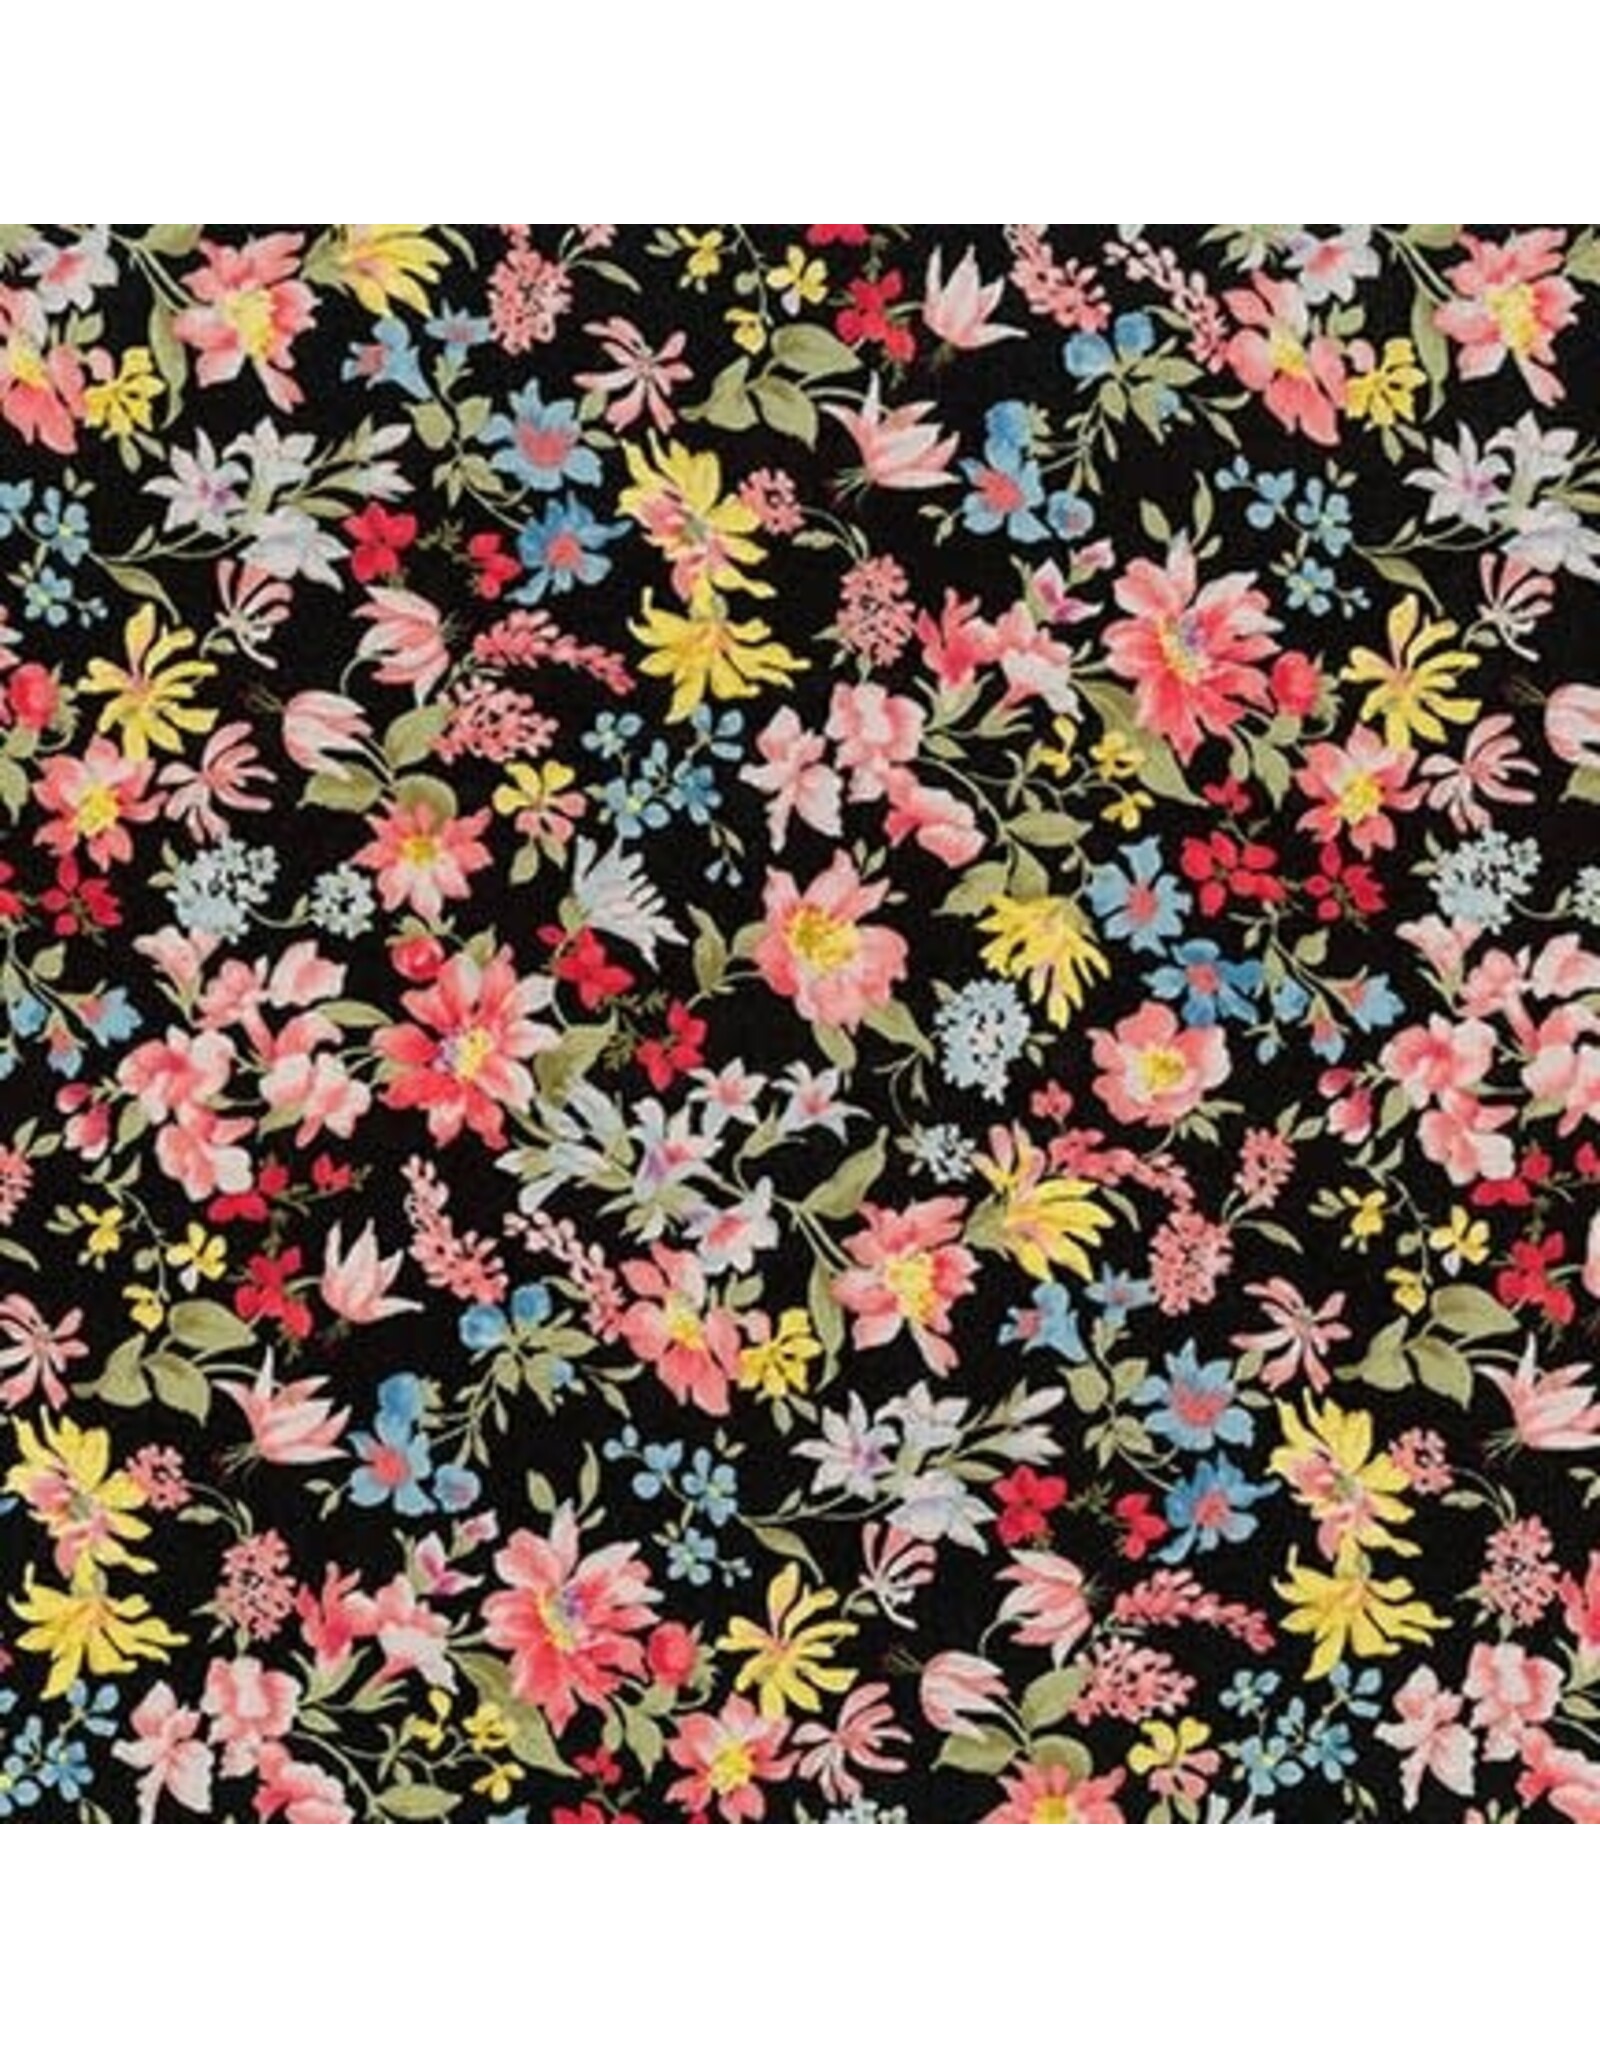 Sevenberry Cotton Lawn, Petite Garden Lawn in Black with Bright, Fabric Half-Yards